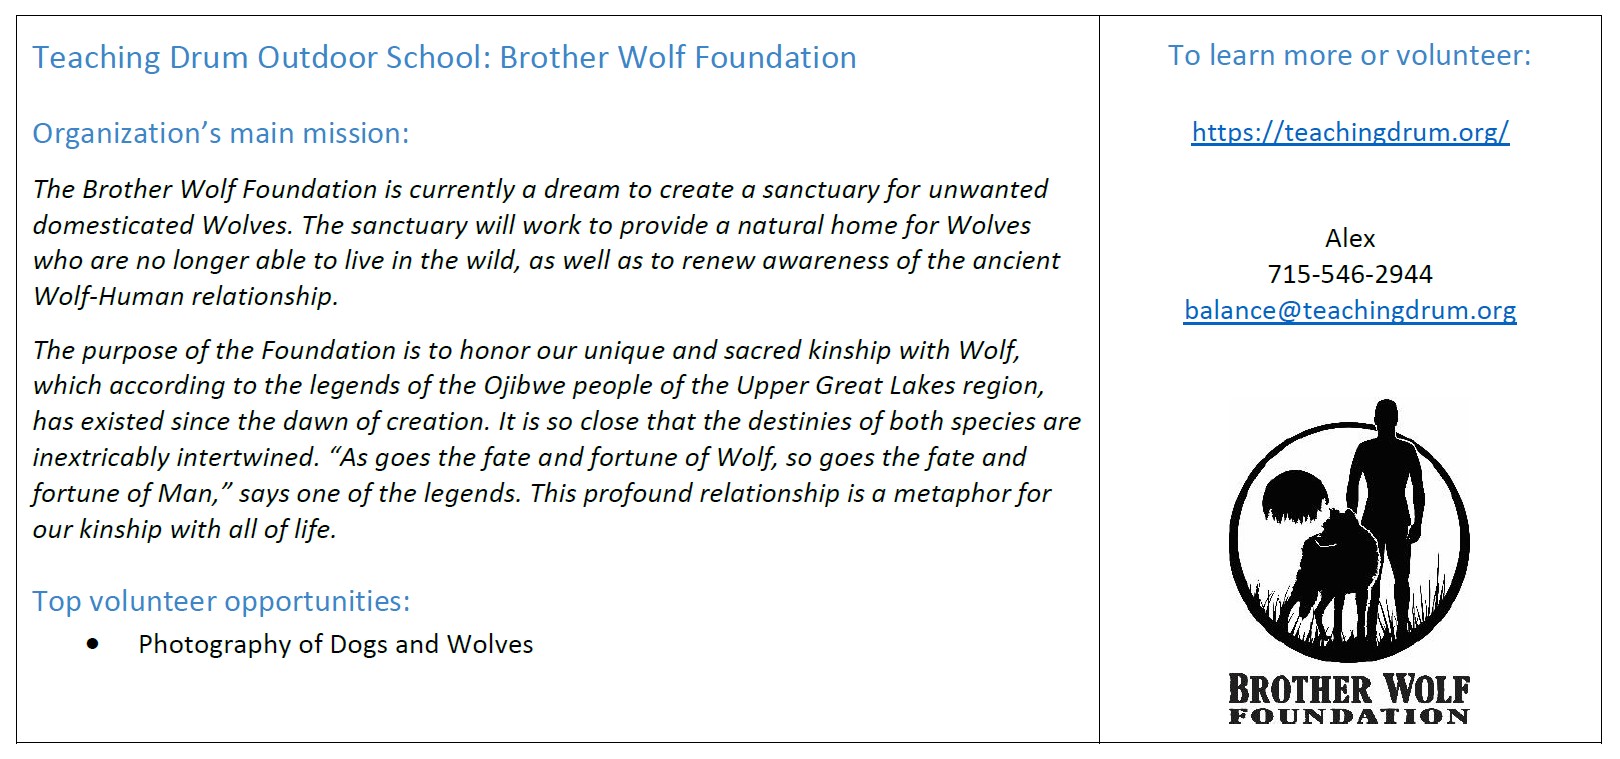 Volunteer opportunities at Brother Wolf Foundation